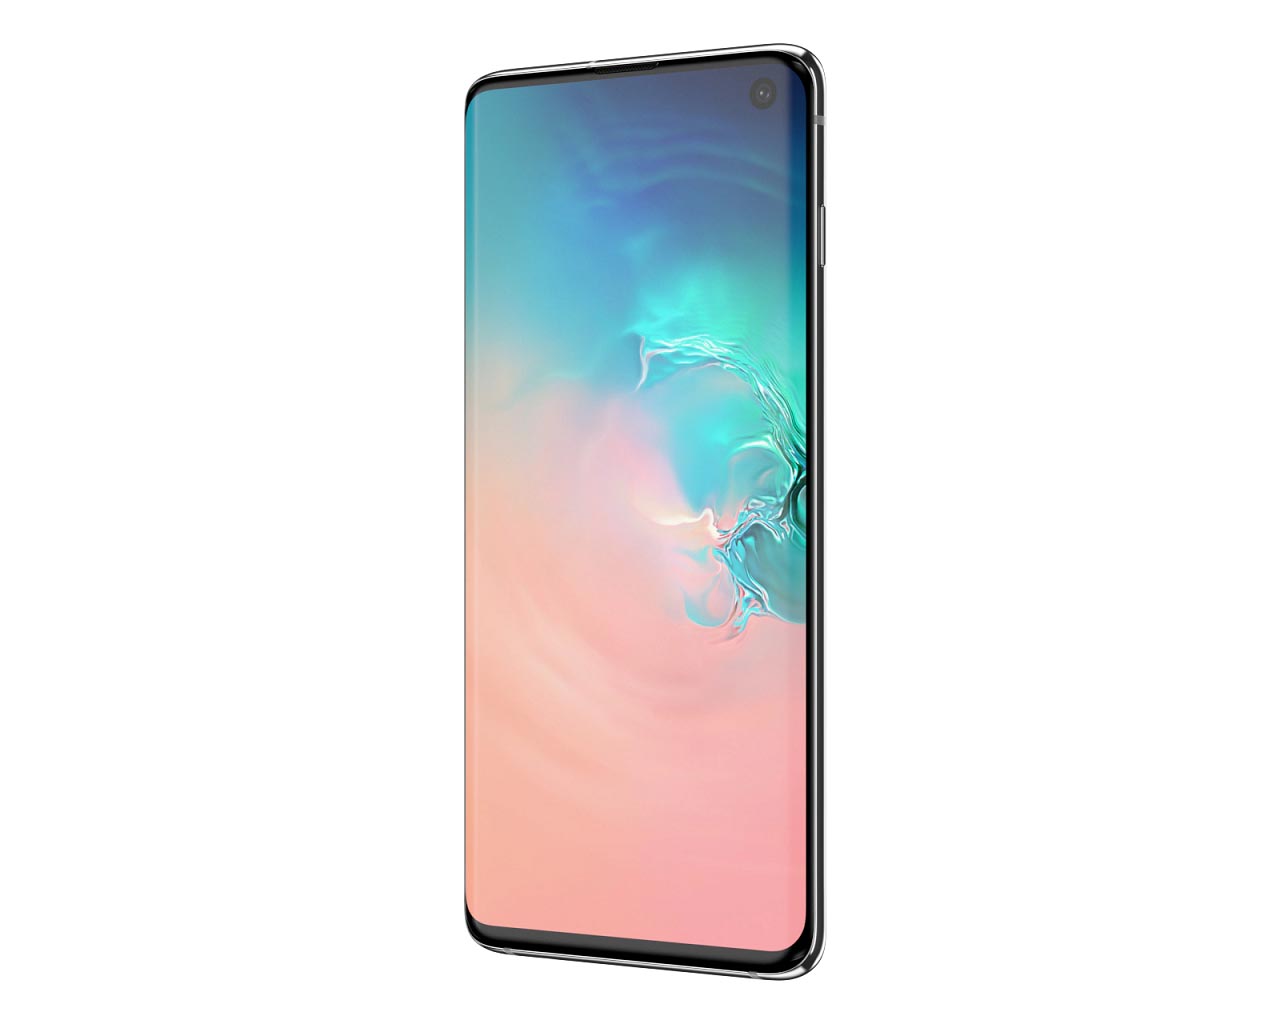 Galaxy S20 vs. S10 specs compared: What Samsung changed in 2020 - CNET